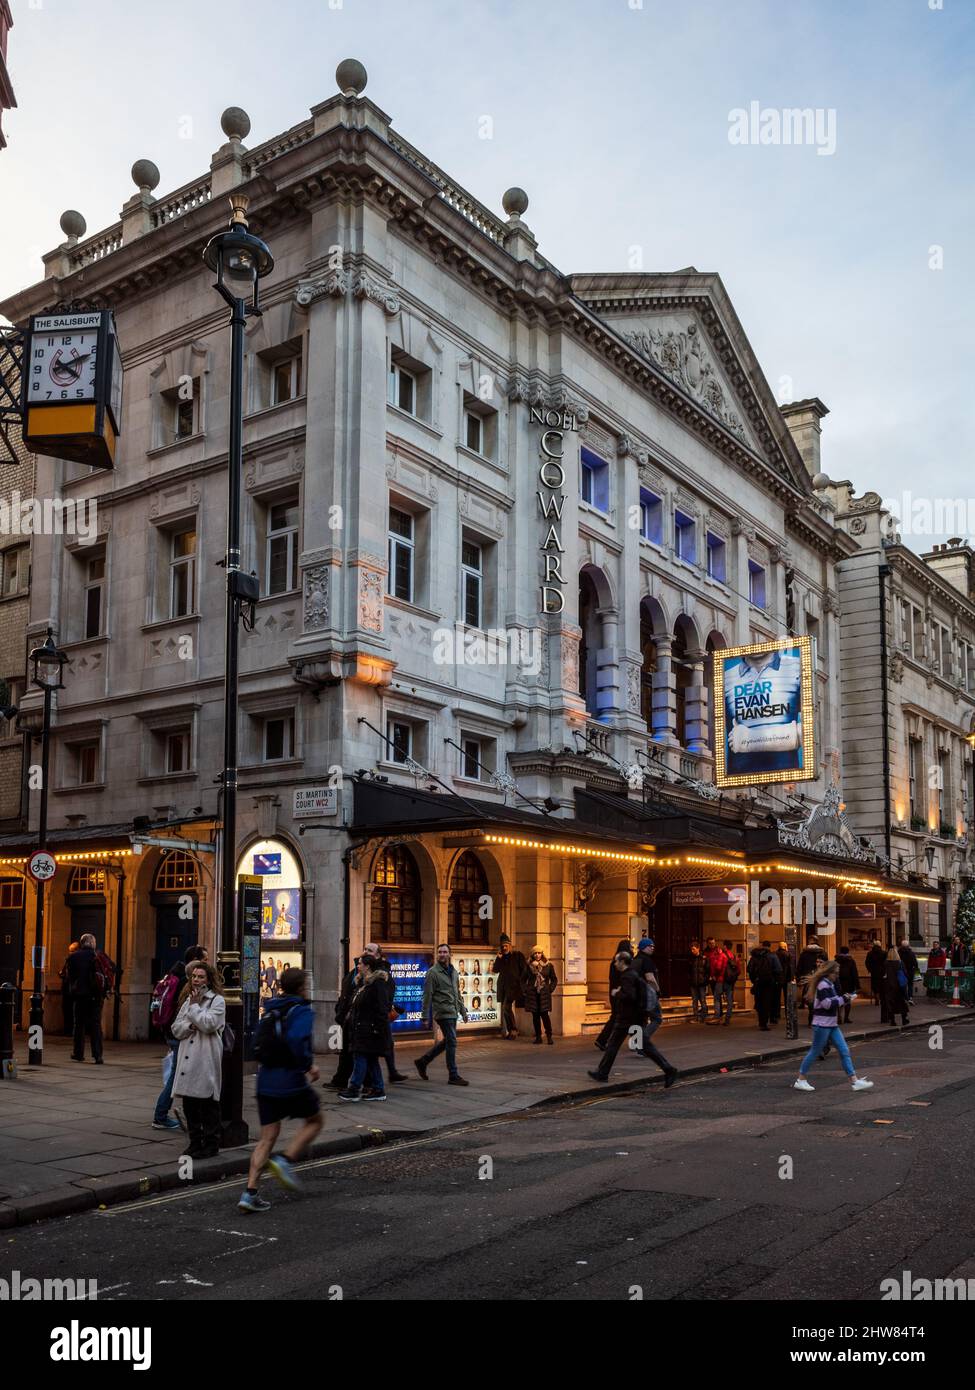 The Noel Coward Theatre London. Formerly known as the Albery Theatre, The Noel Coward Theatre is a West End theatre in St. Martin's Lane, opened 1903. Stock Photo